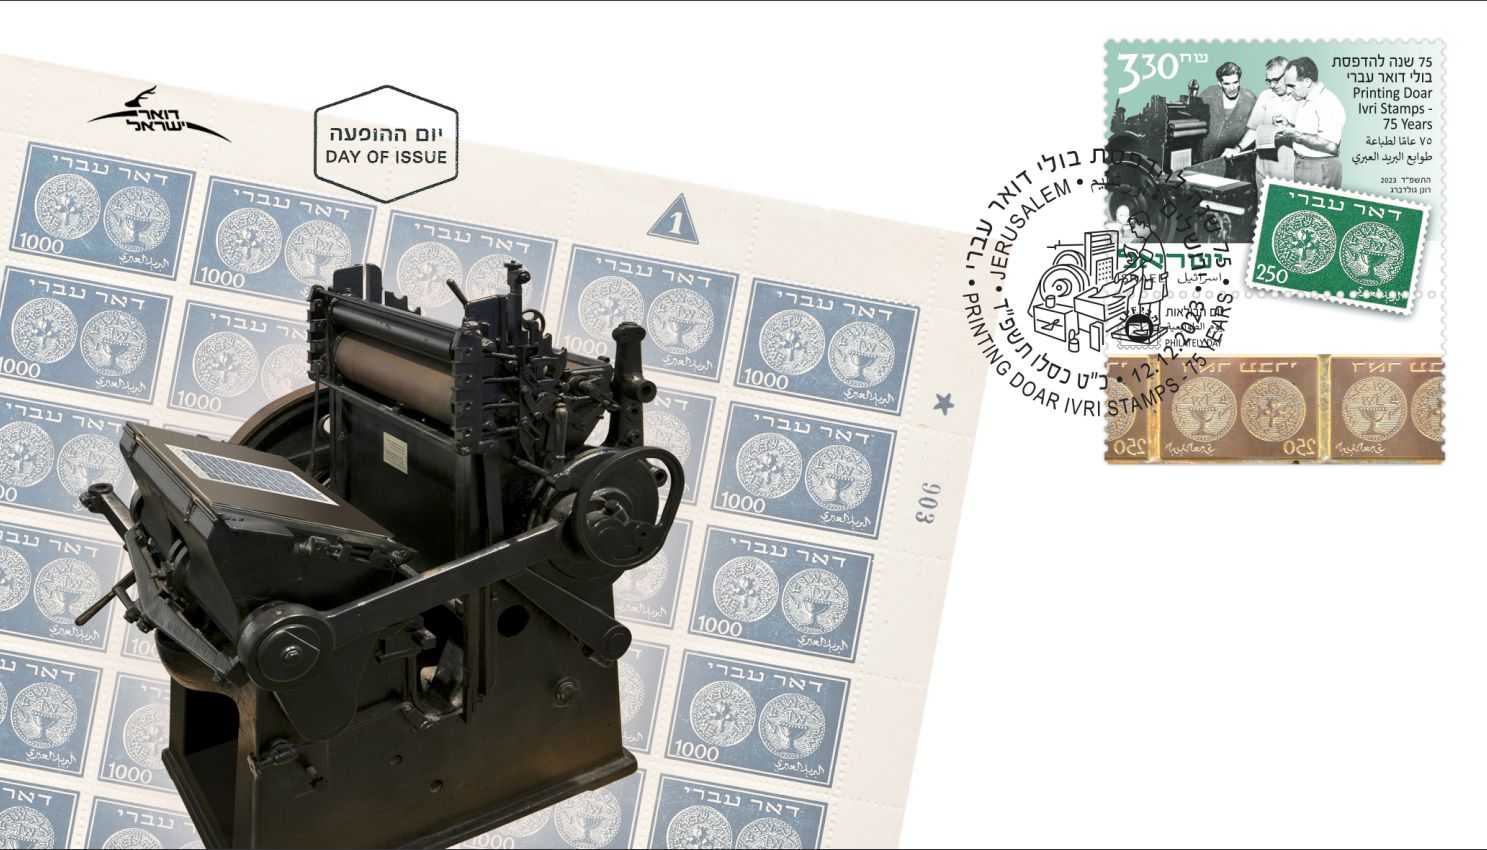 http://israelphilately.org.il/images/stamps/065831.jpg